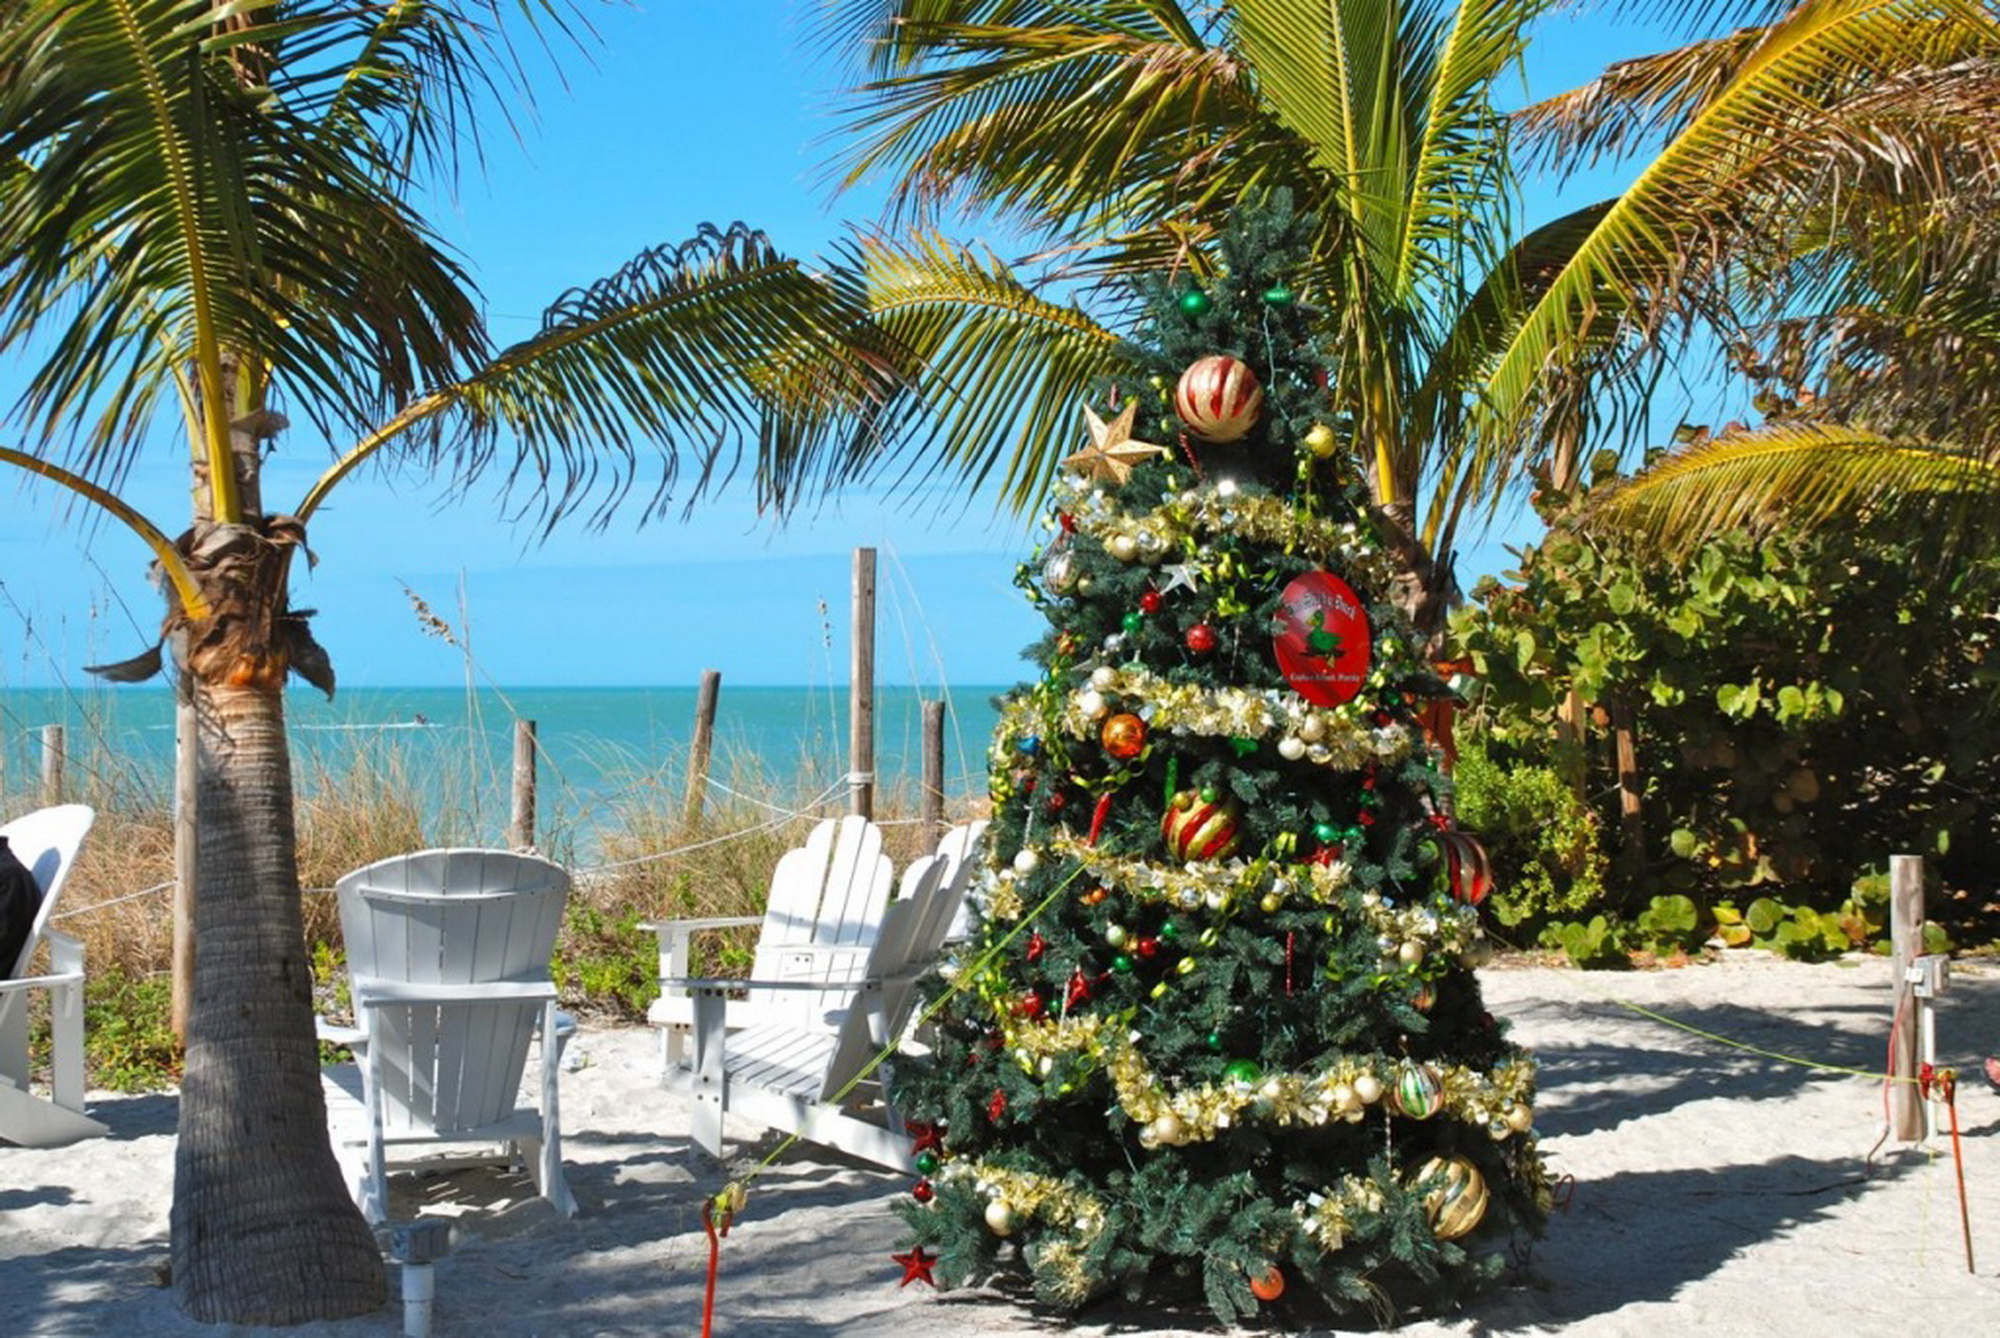 South Florida Vacation Rental Accommodations During The Holidays 1 AIRbnb South Florida Injury Law Firm